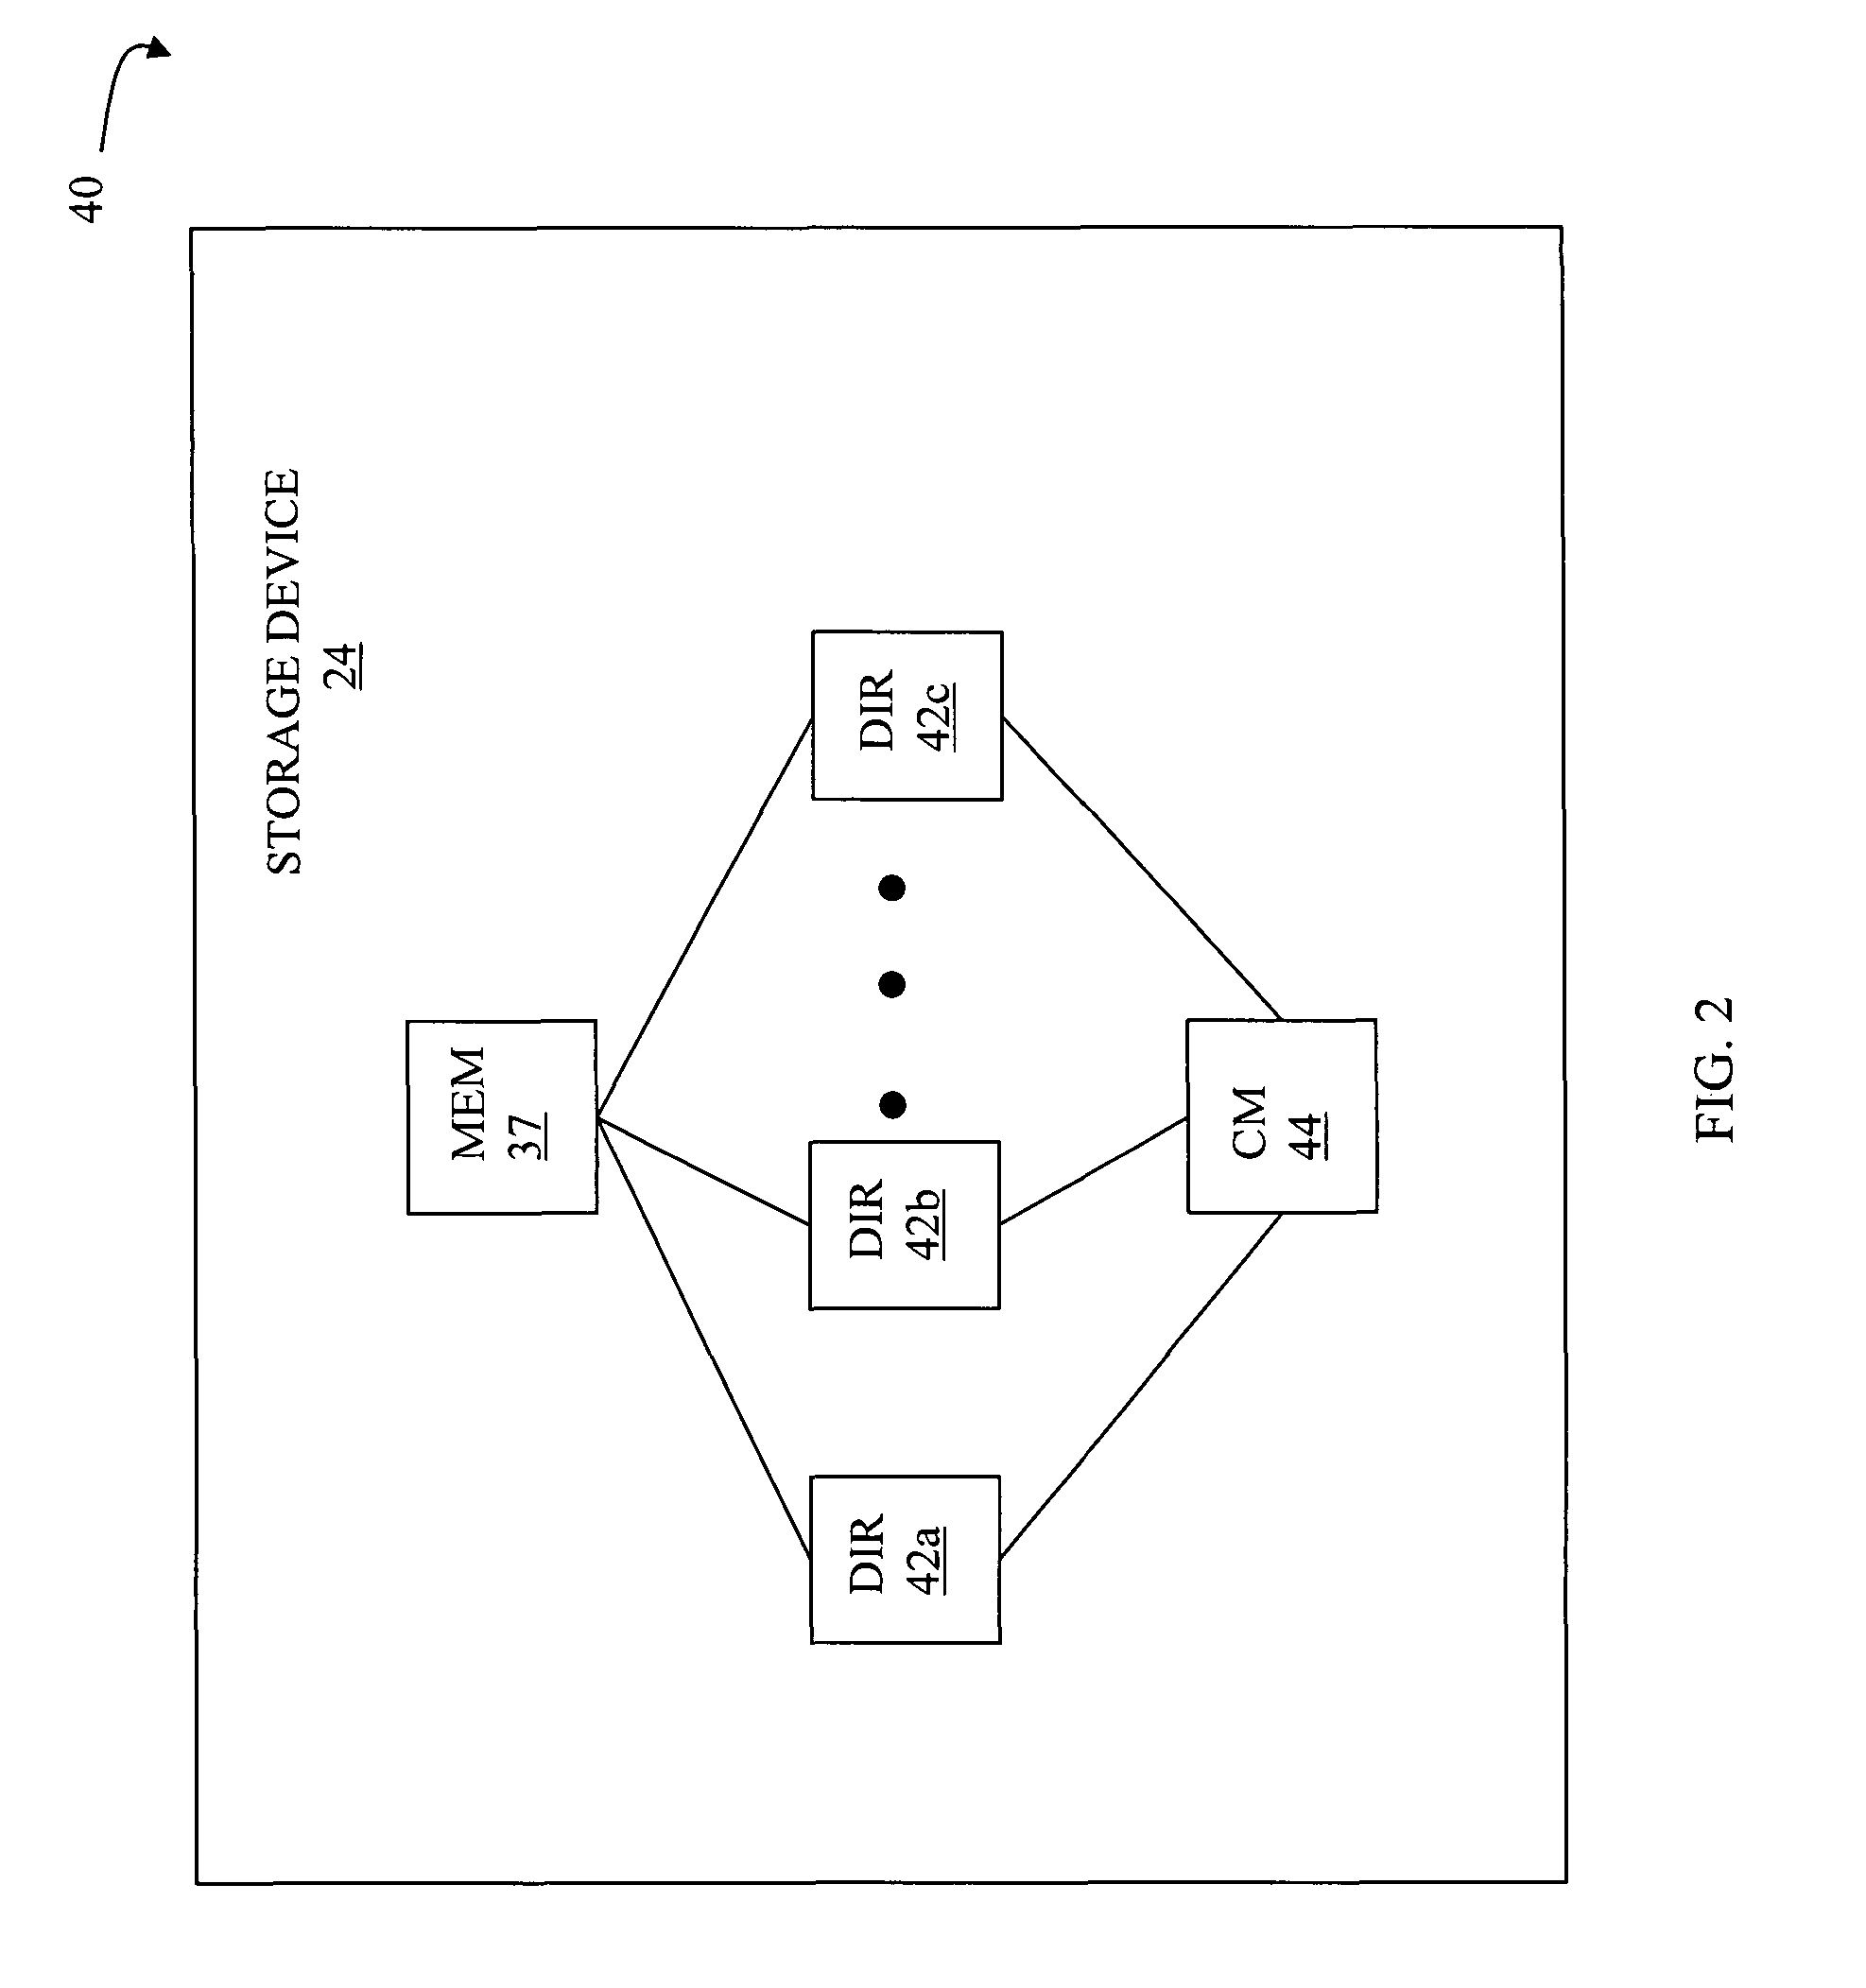 Dynamic balancing of writes between multiple storage devices